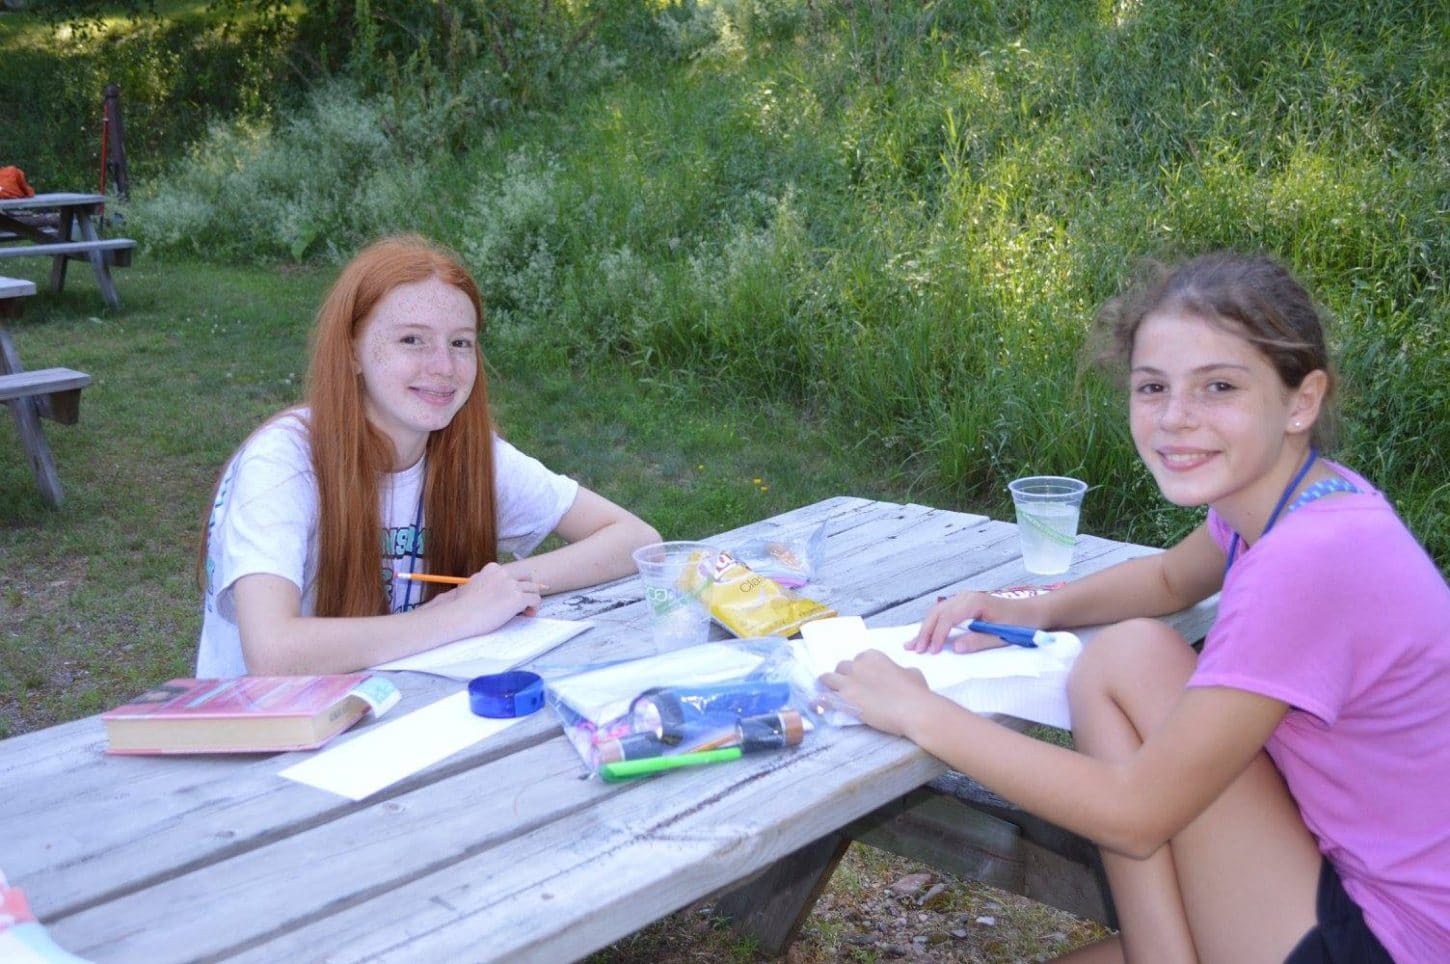 Two WeHaKee campers enjoying time together on a picnic table